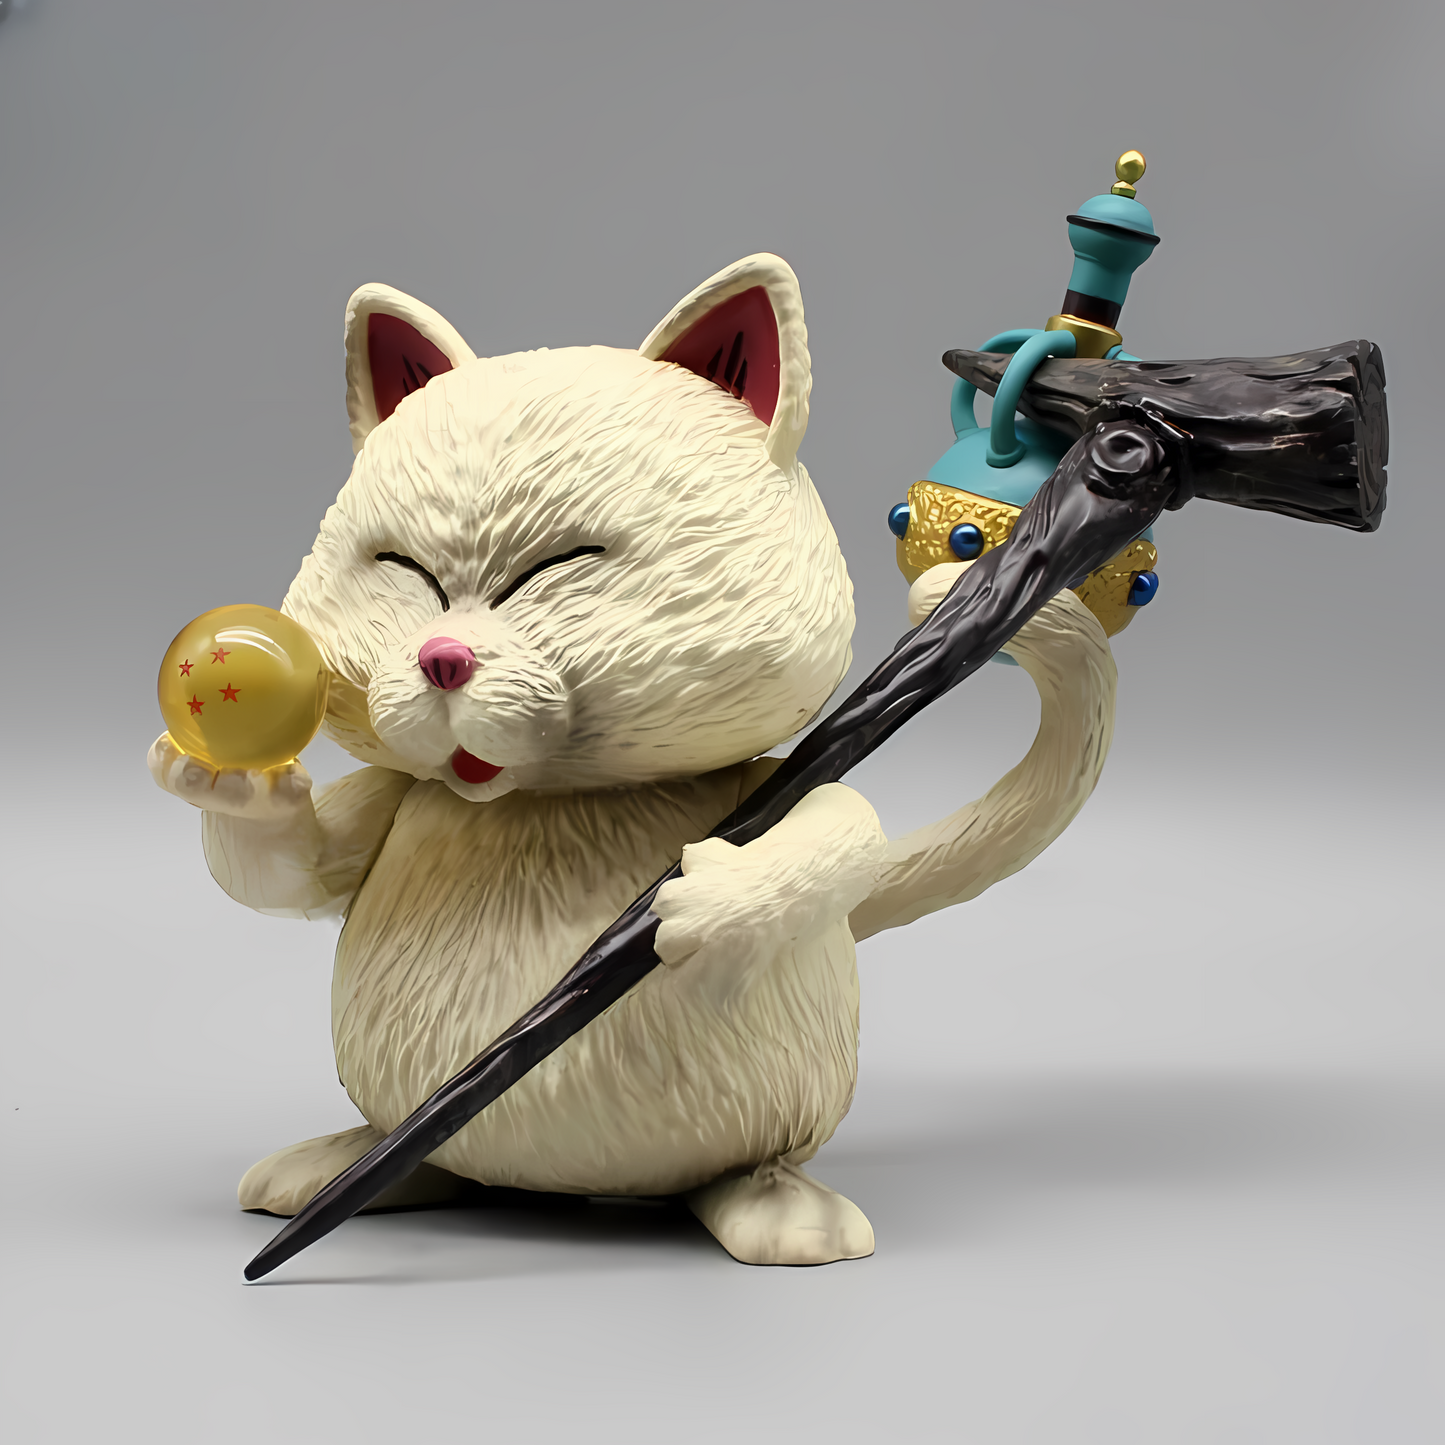 A full-frontal view of the 'Guardian's Wisdom Karin' collectible figure, with the cat's joyous expression as he examines a Dragon Ball, capturing a moment of delight.